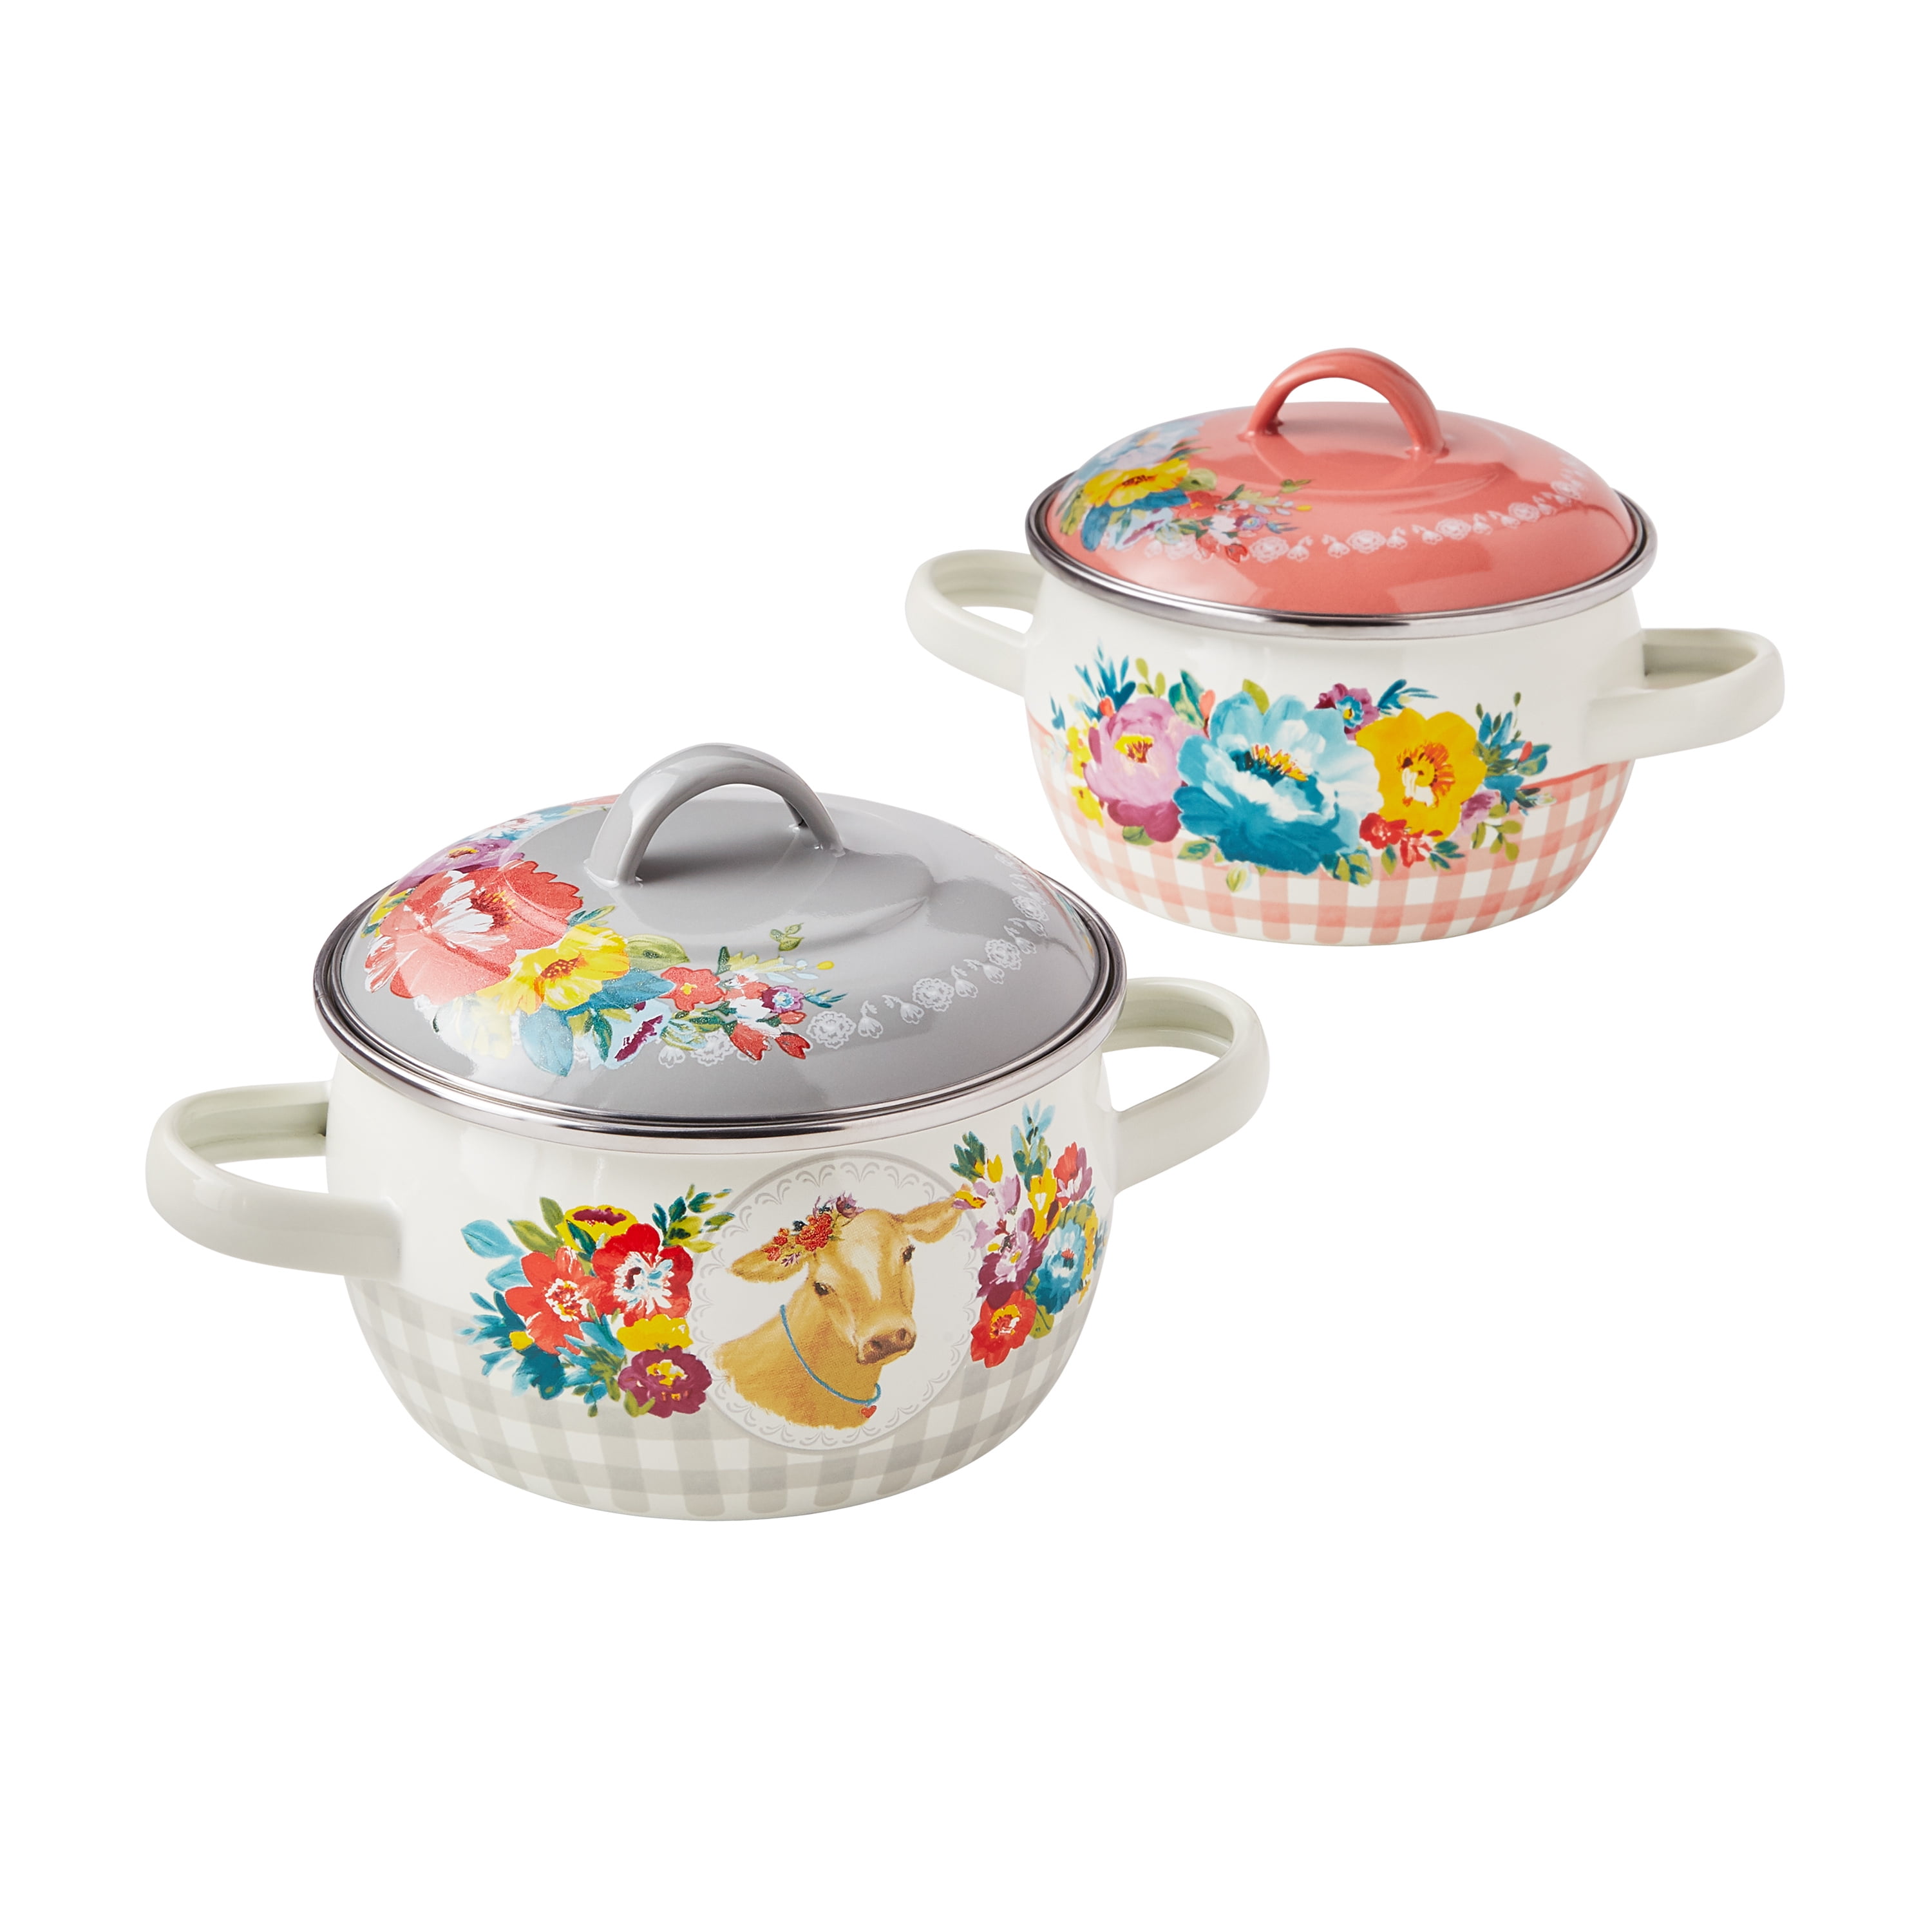 The Pioneer Woman Sweet Romance 1.05-Quart Enamel on Steel Mini Dutch Oven with Lid, Set of 2 - Gingham Novelty